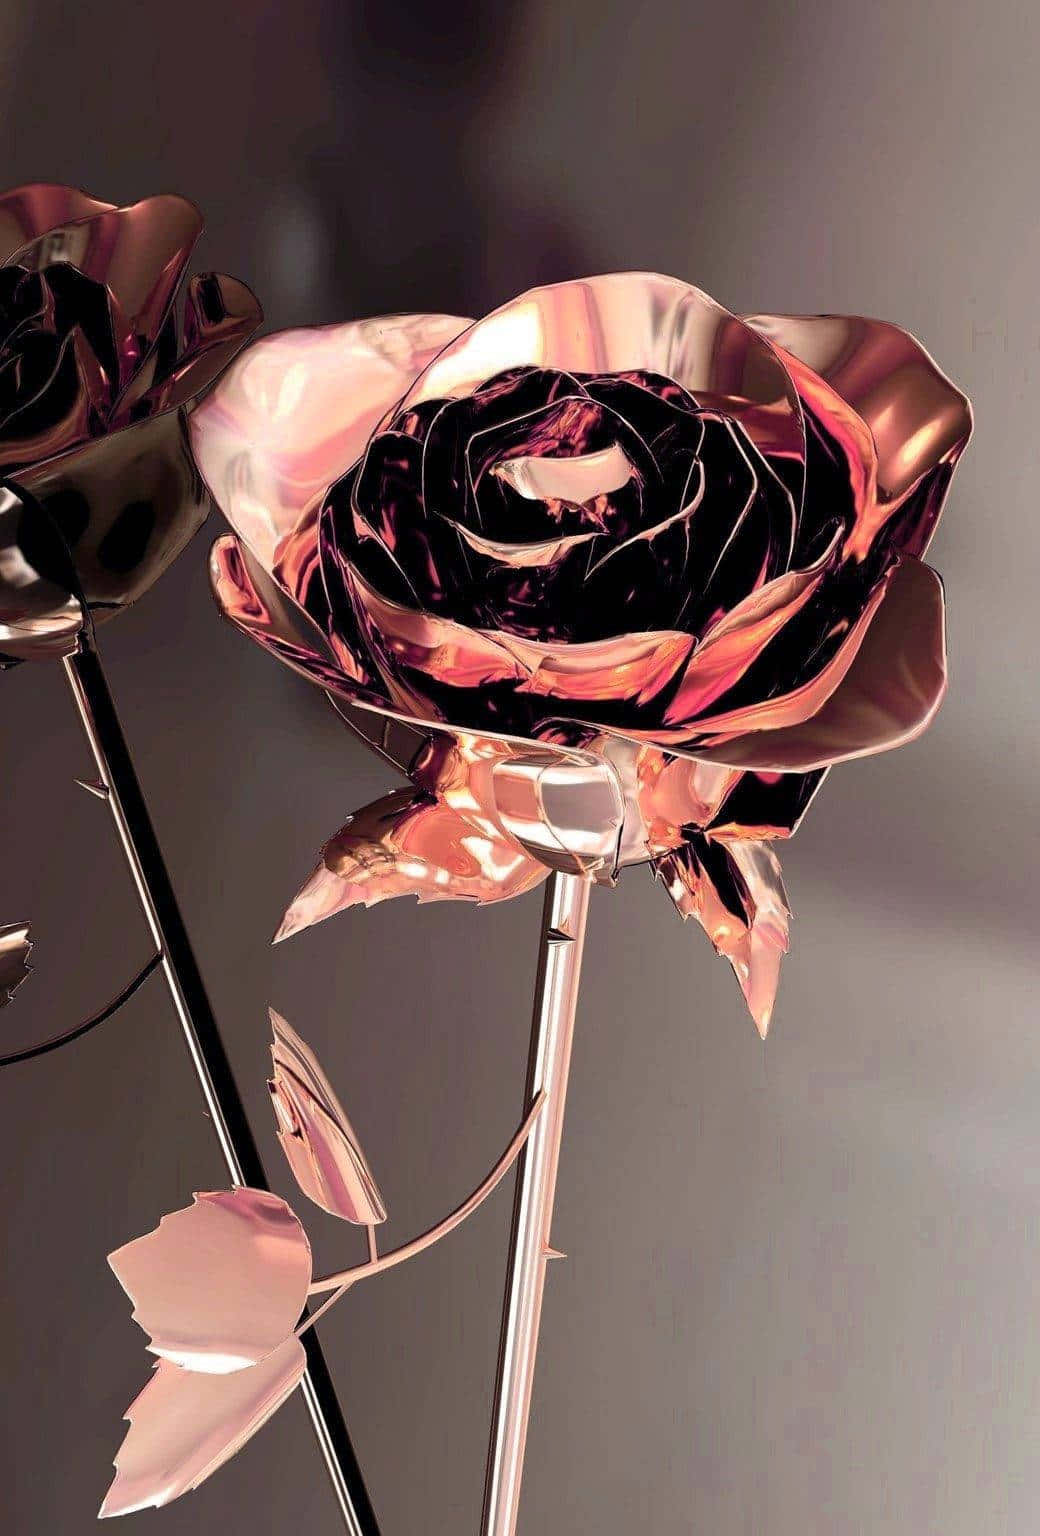 Two delicate pink roses - perfect for someone special. Wallpaper